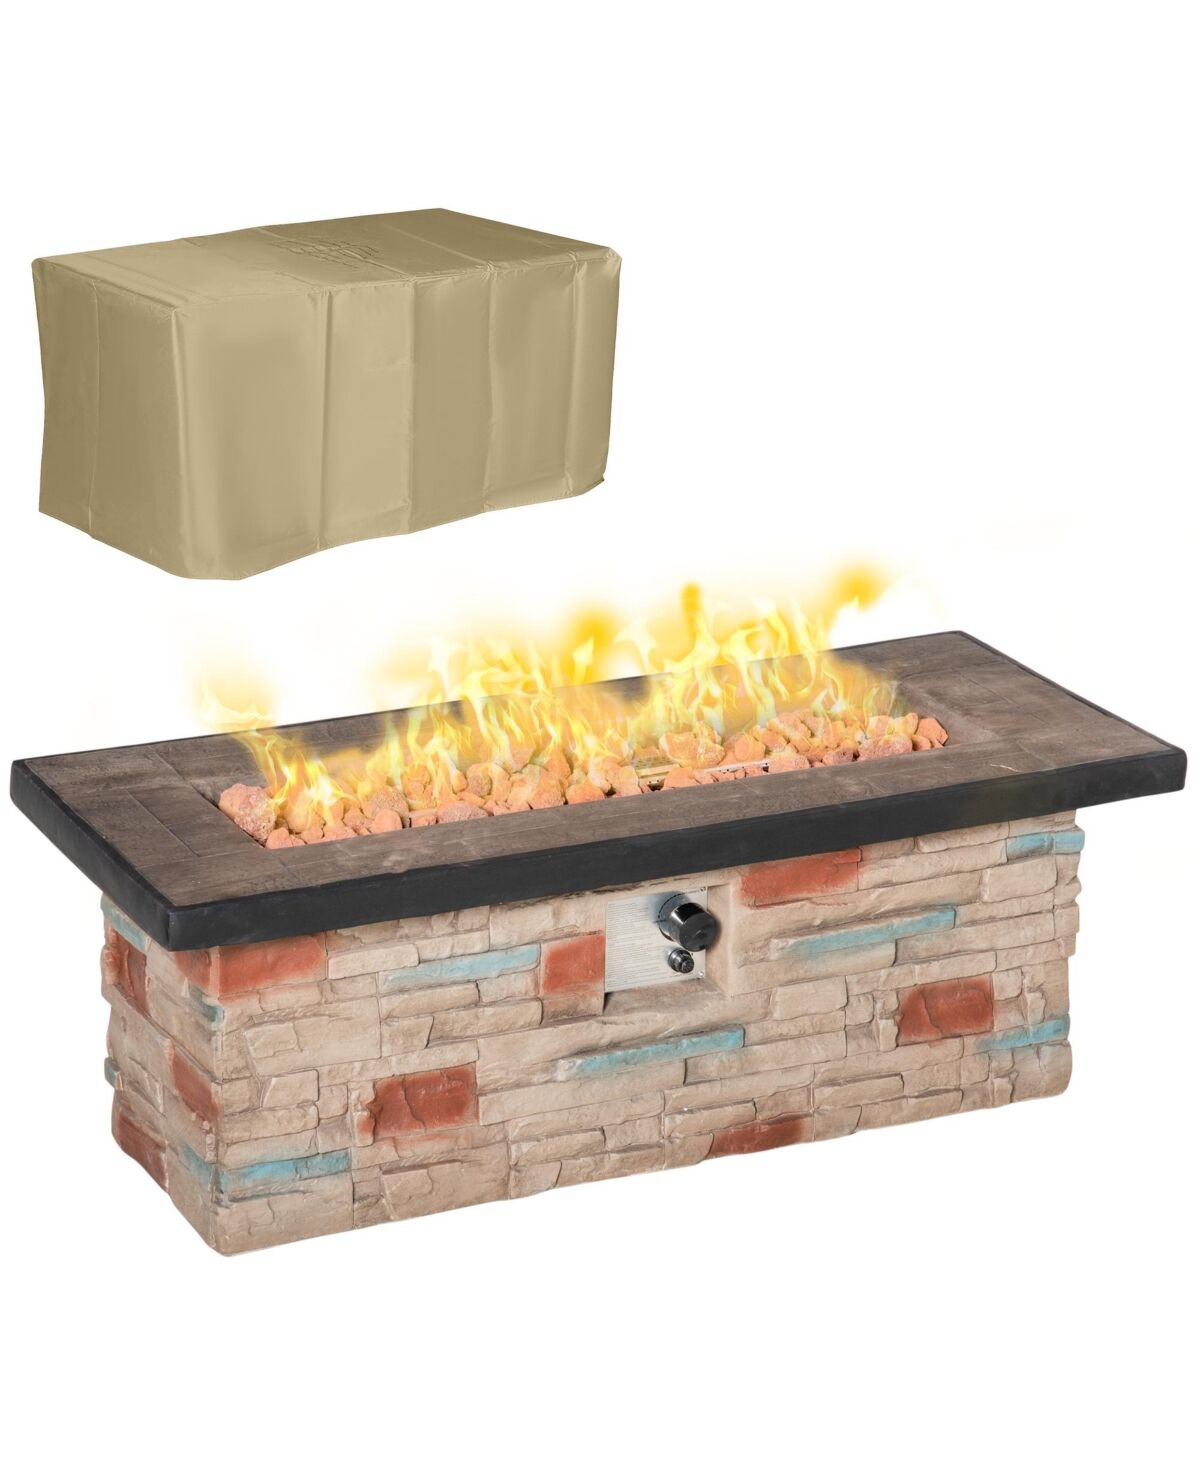 Outsunny 48 Inch Outdoor Propane Gas Fire Pit Table, 50,000 Btu Auto-Ignition Rectangular Faux Ledge Stone Gas Firepit with Lava Rocks and Rain Cover,